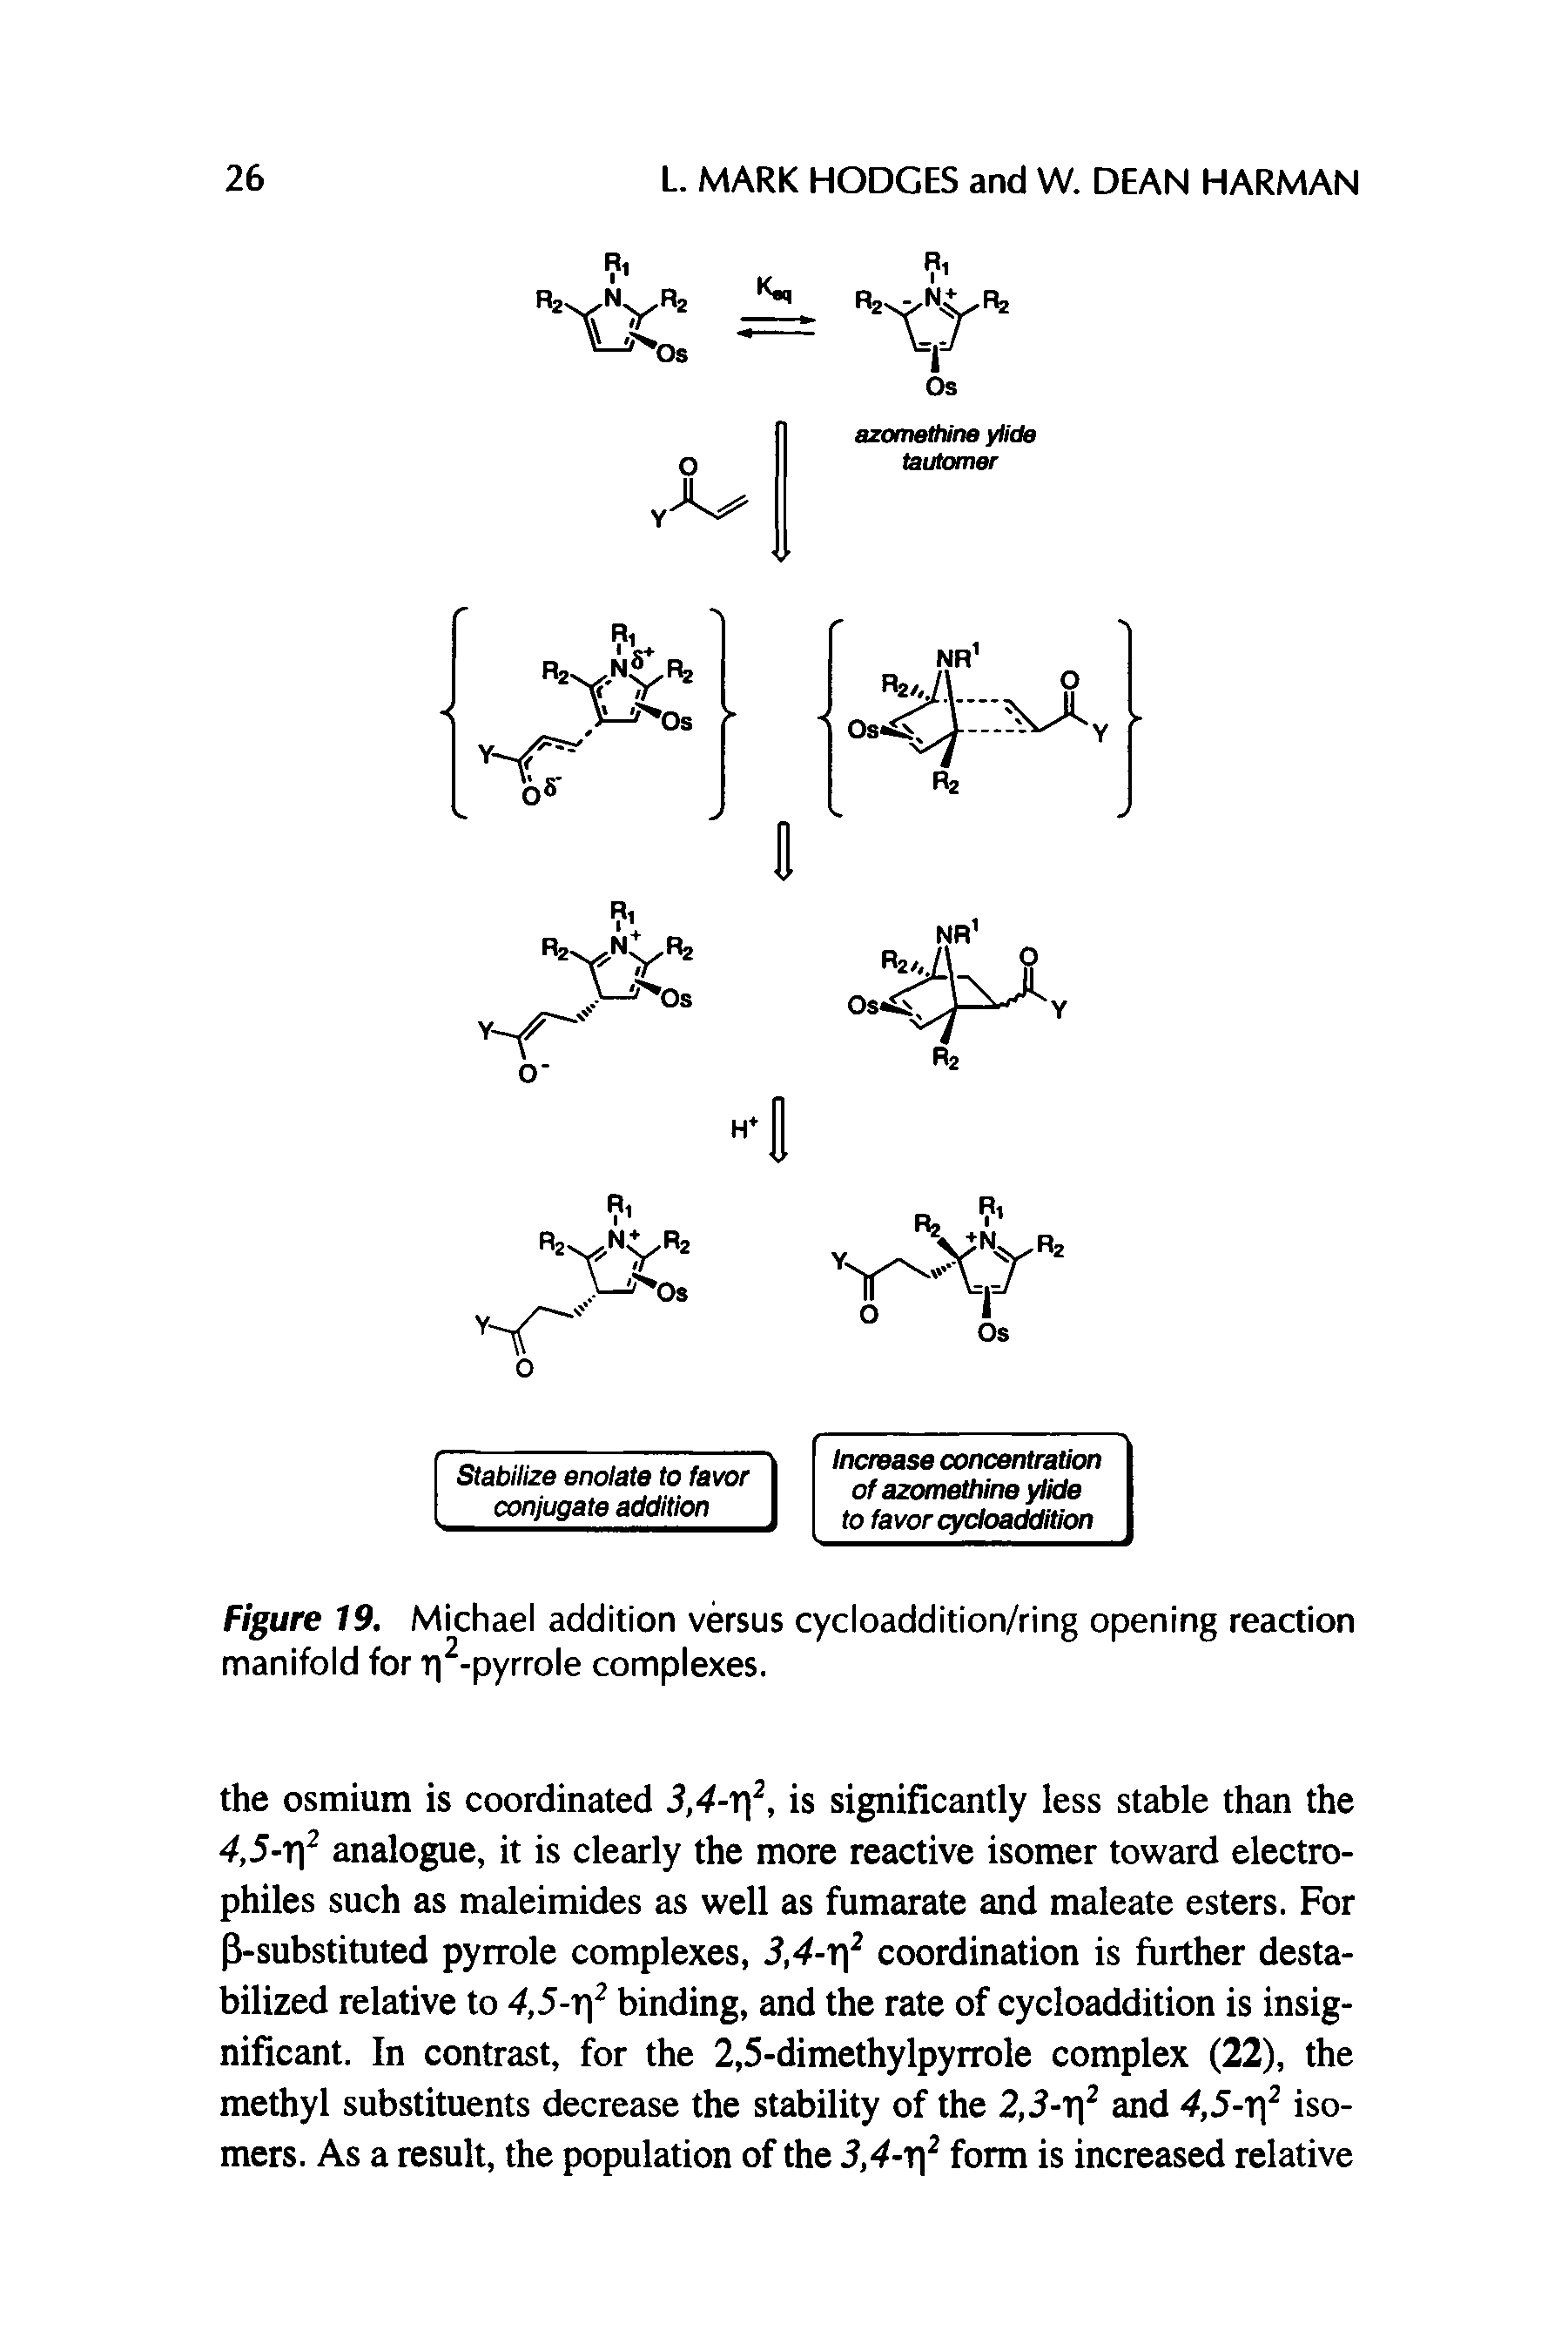 Figure 19. Michael addition versus cycloaddition/ring opening reaction manifold for ri2-pyrrole complexes.